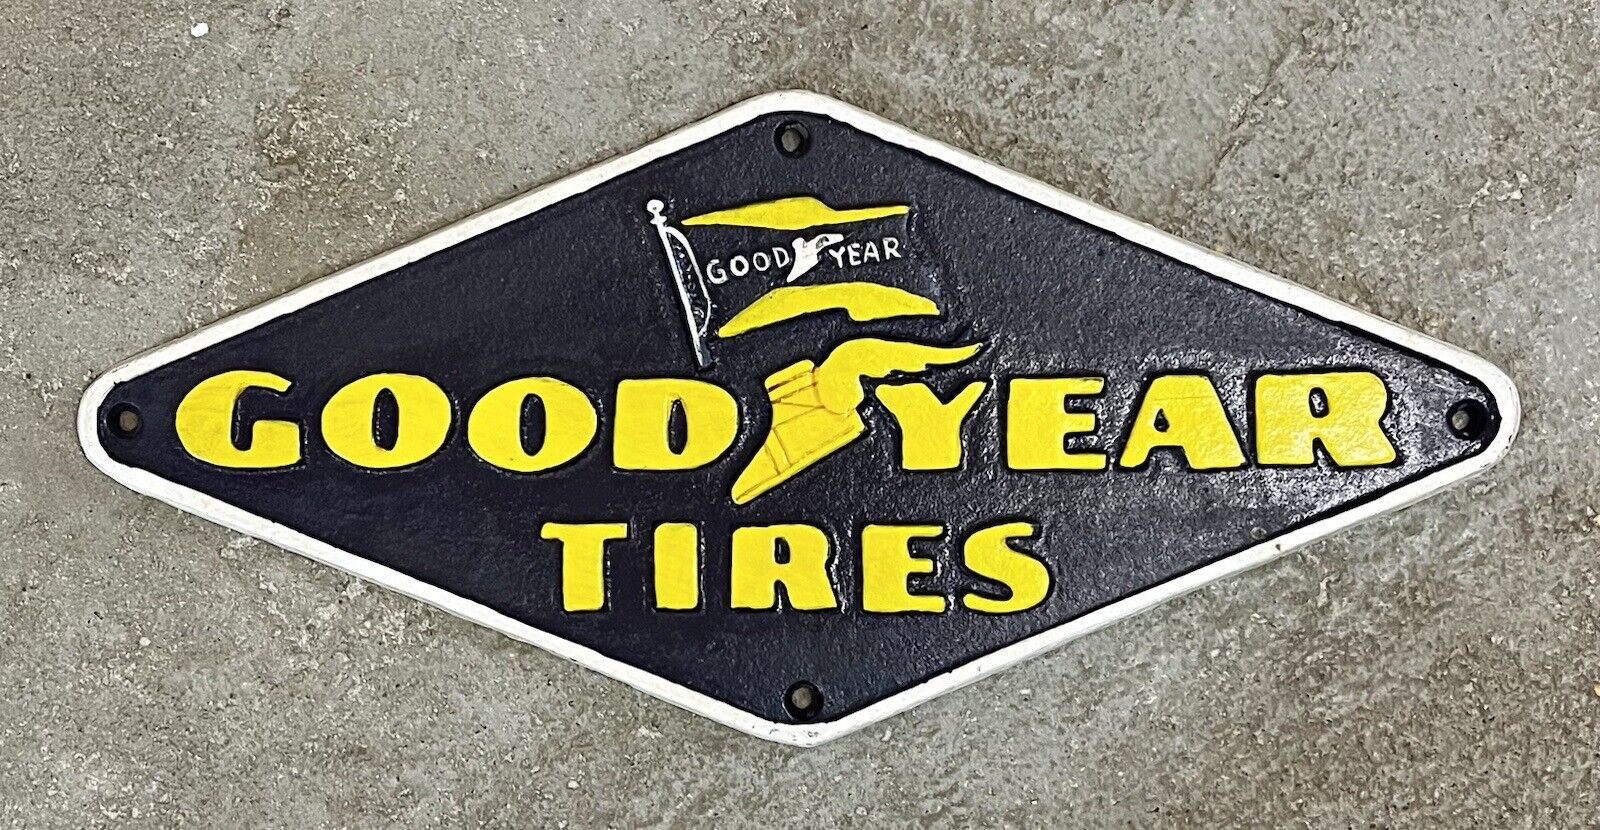 GOODYEAR TIRES Founded 1898 Diamond Shaped Cast Iron Sign, 7” x 15”